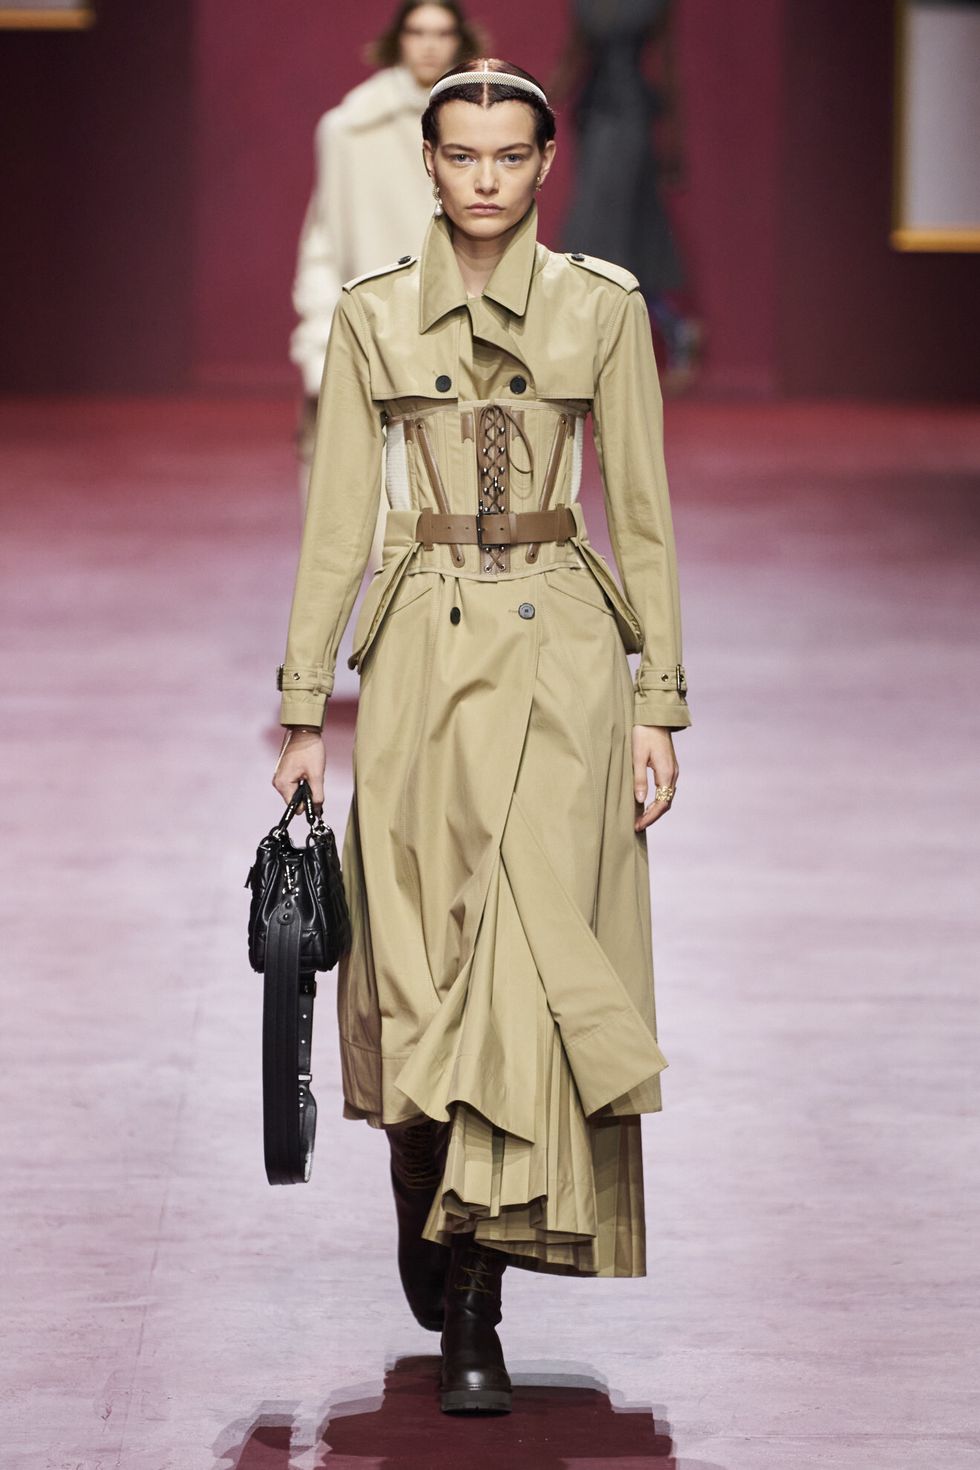 Burberry Makes a Triumphant Return to the Runway